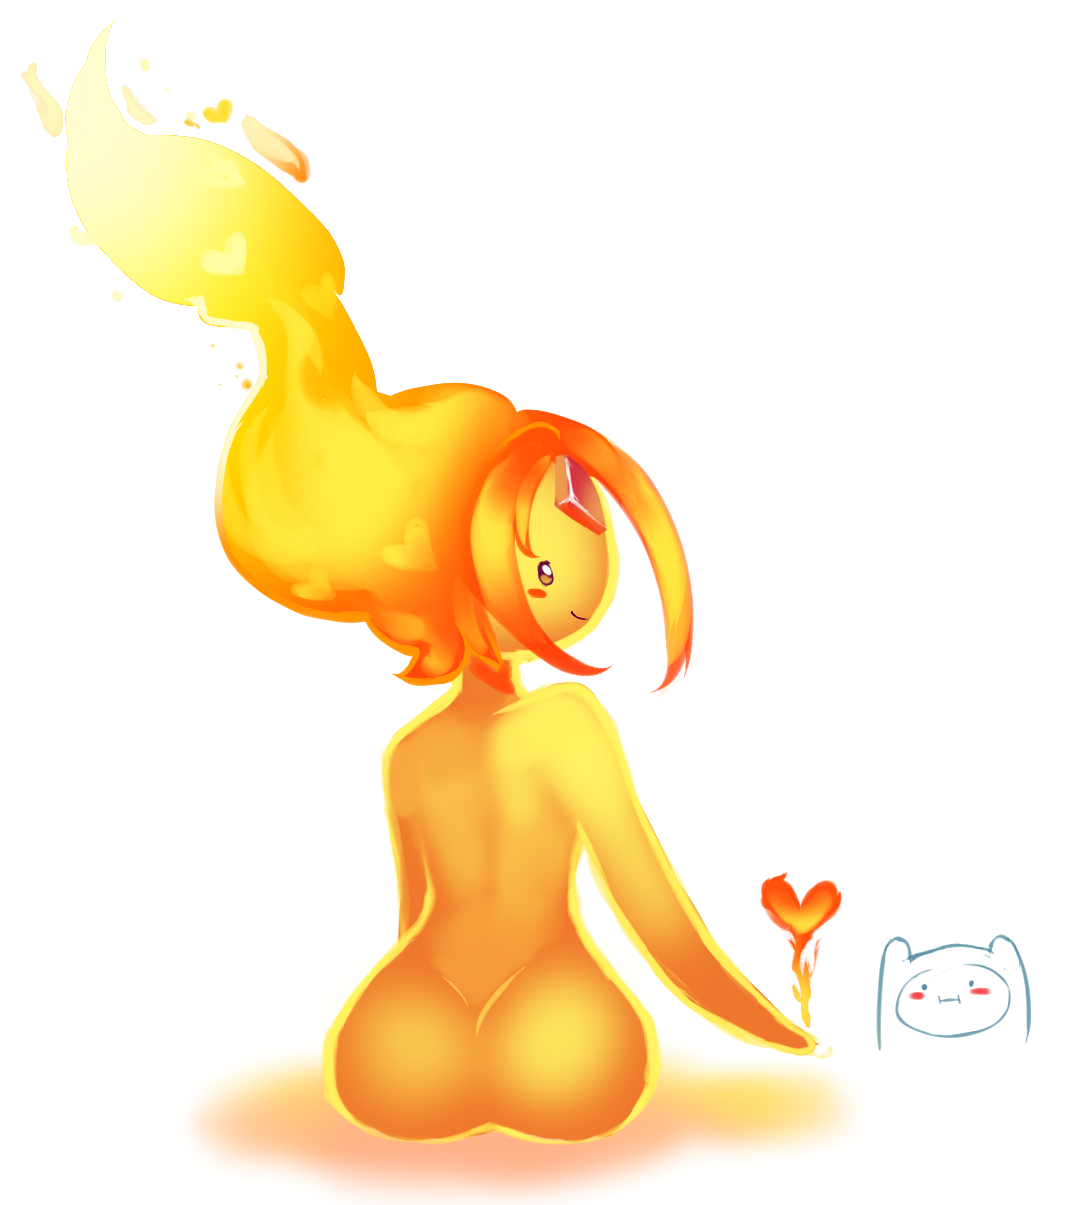 Extra Butt doodles!Butt Request #8 (My own request.)Flame Princess(Too tired to even